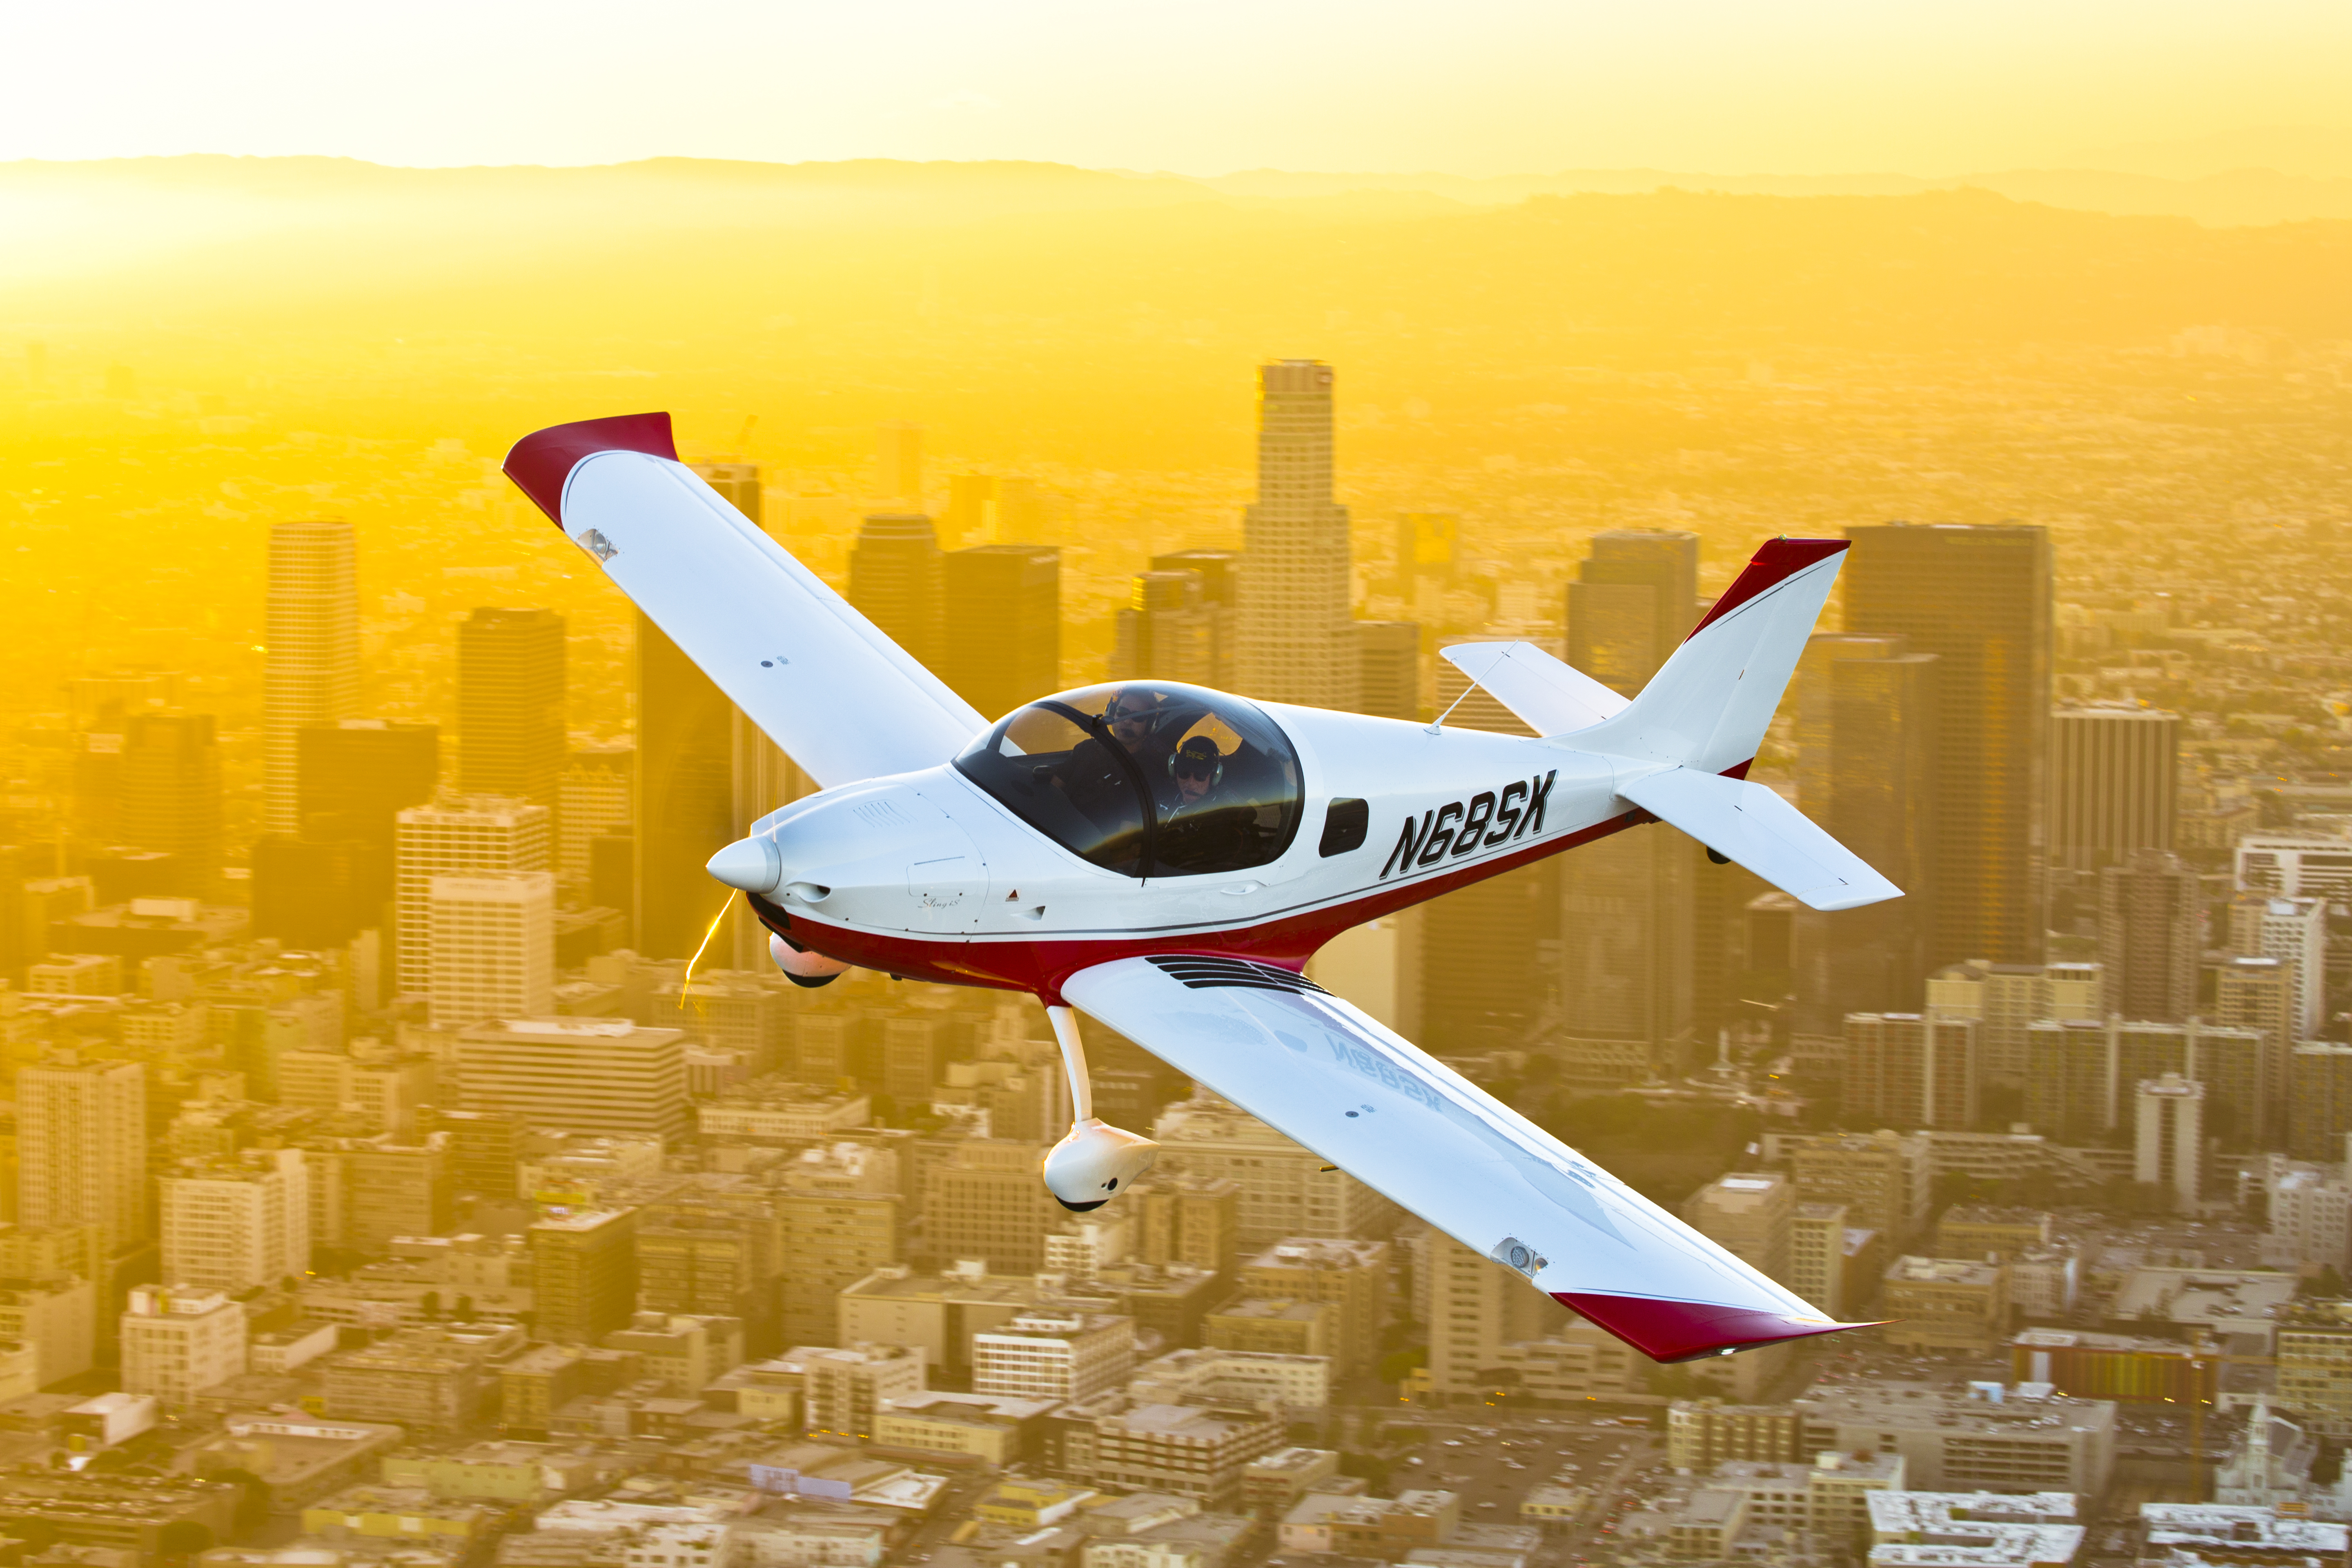 The Sling is a lightweight aluminum and composite aircraft.